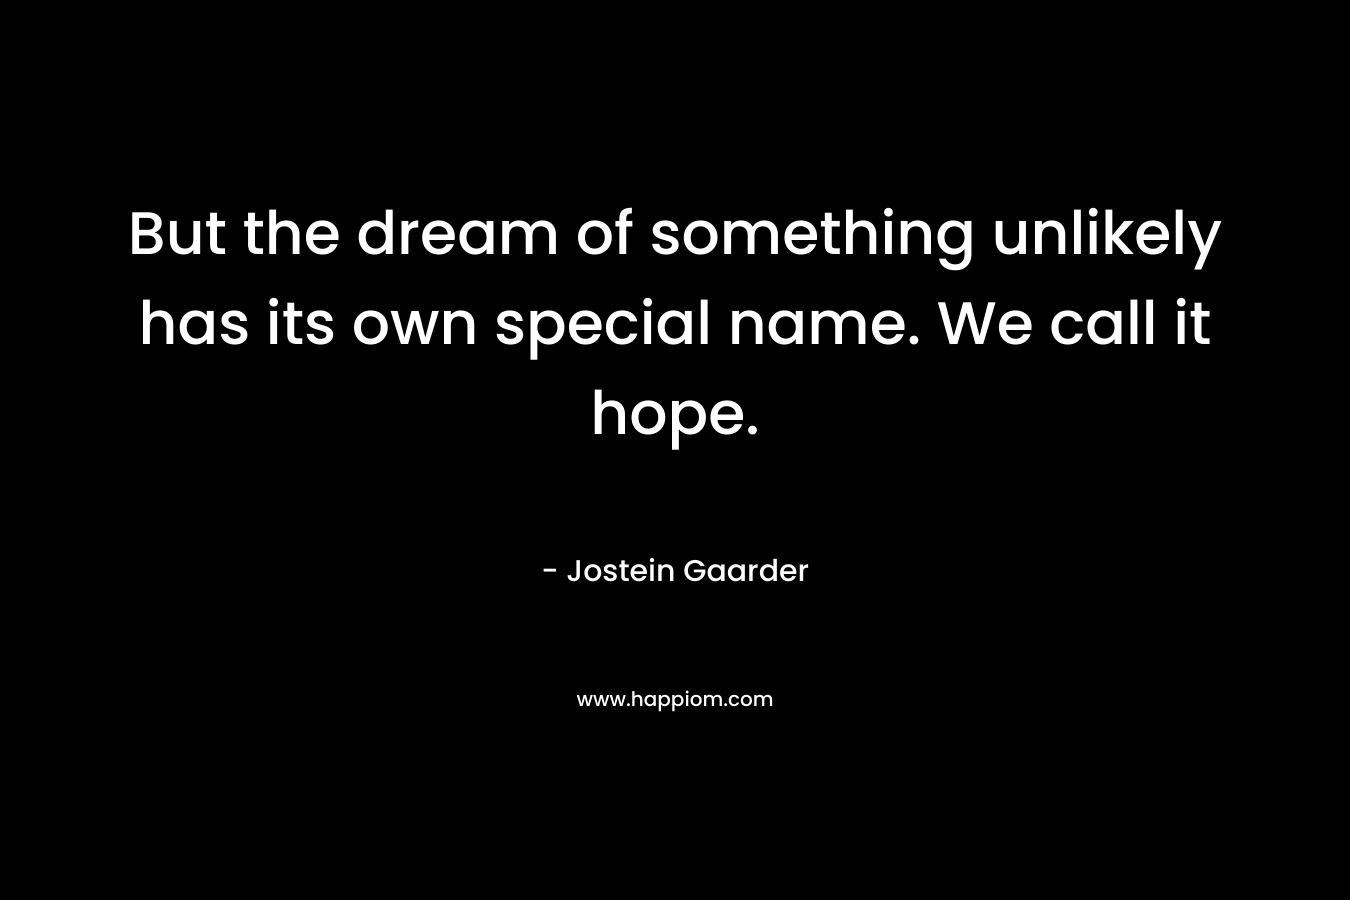 But the dream of something unlikely has its own special name. We call it hope. – Jostein Gaarder